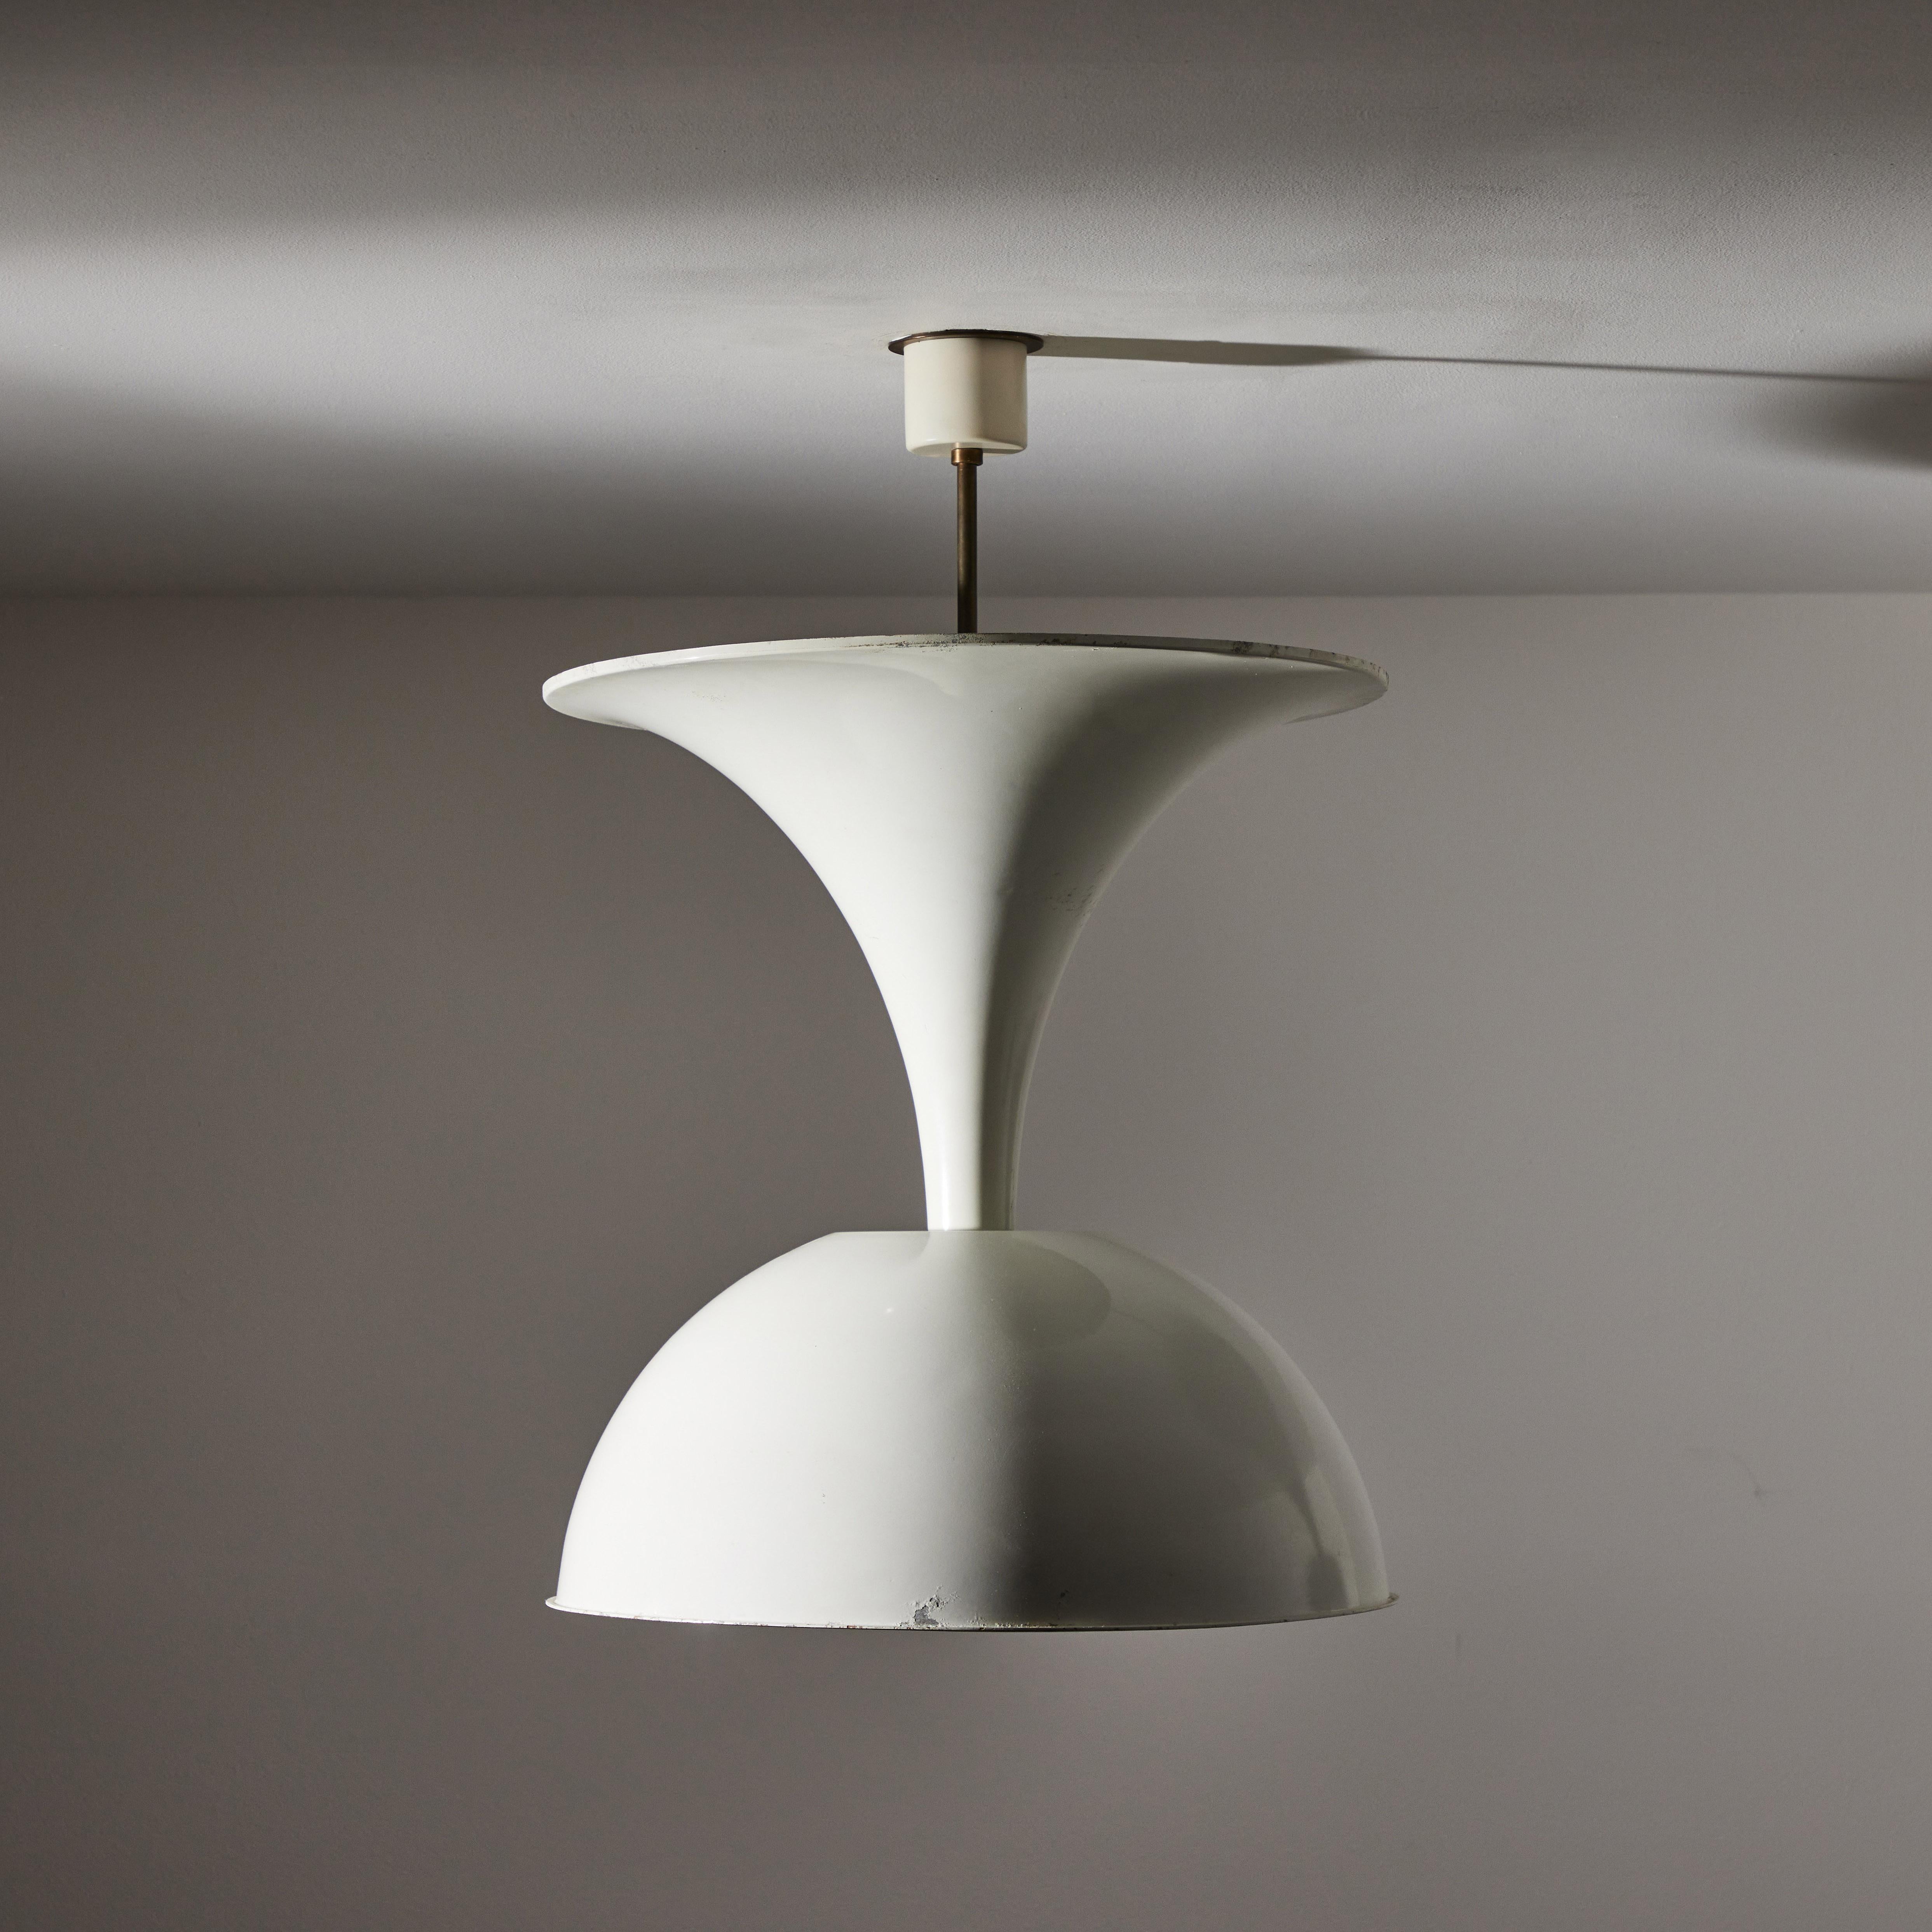 Metal Sculptural Ceiling Light by Valenti